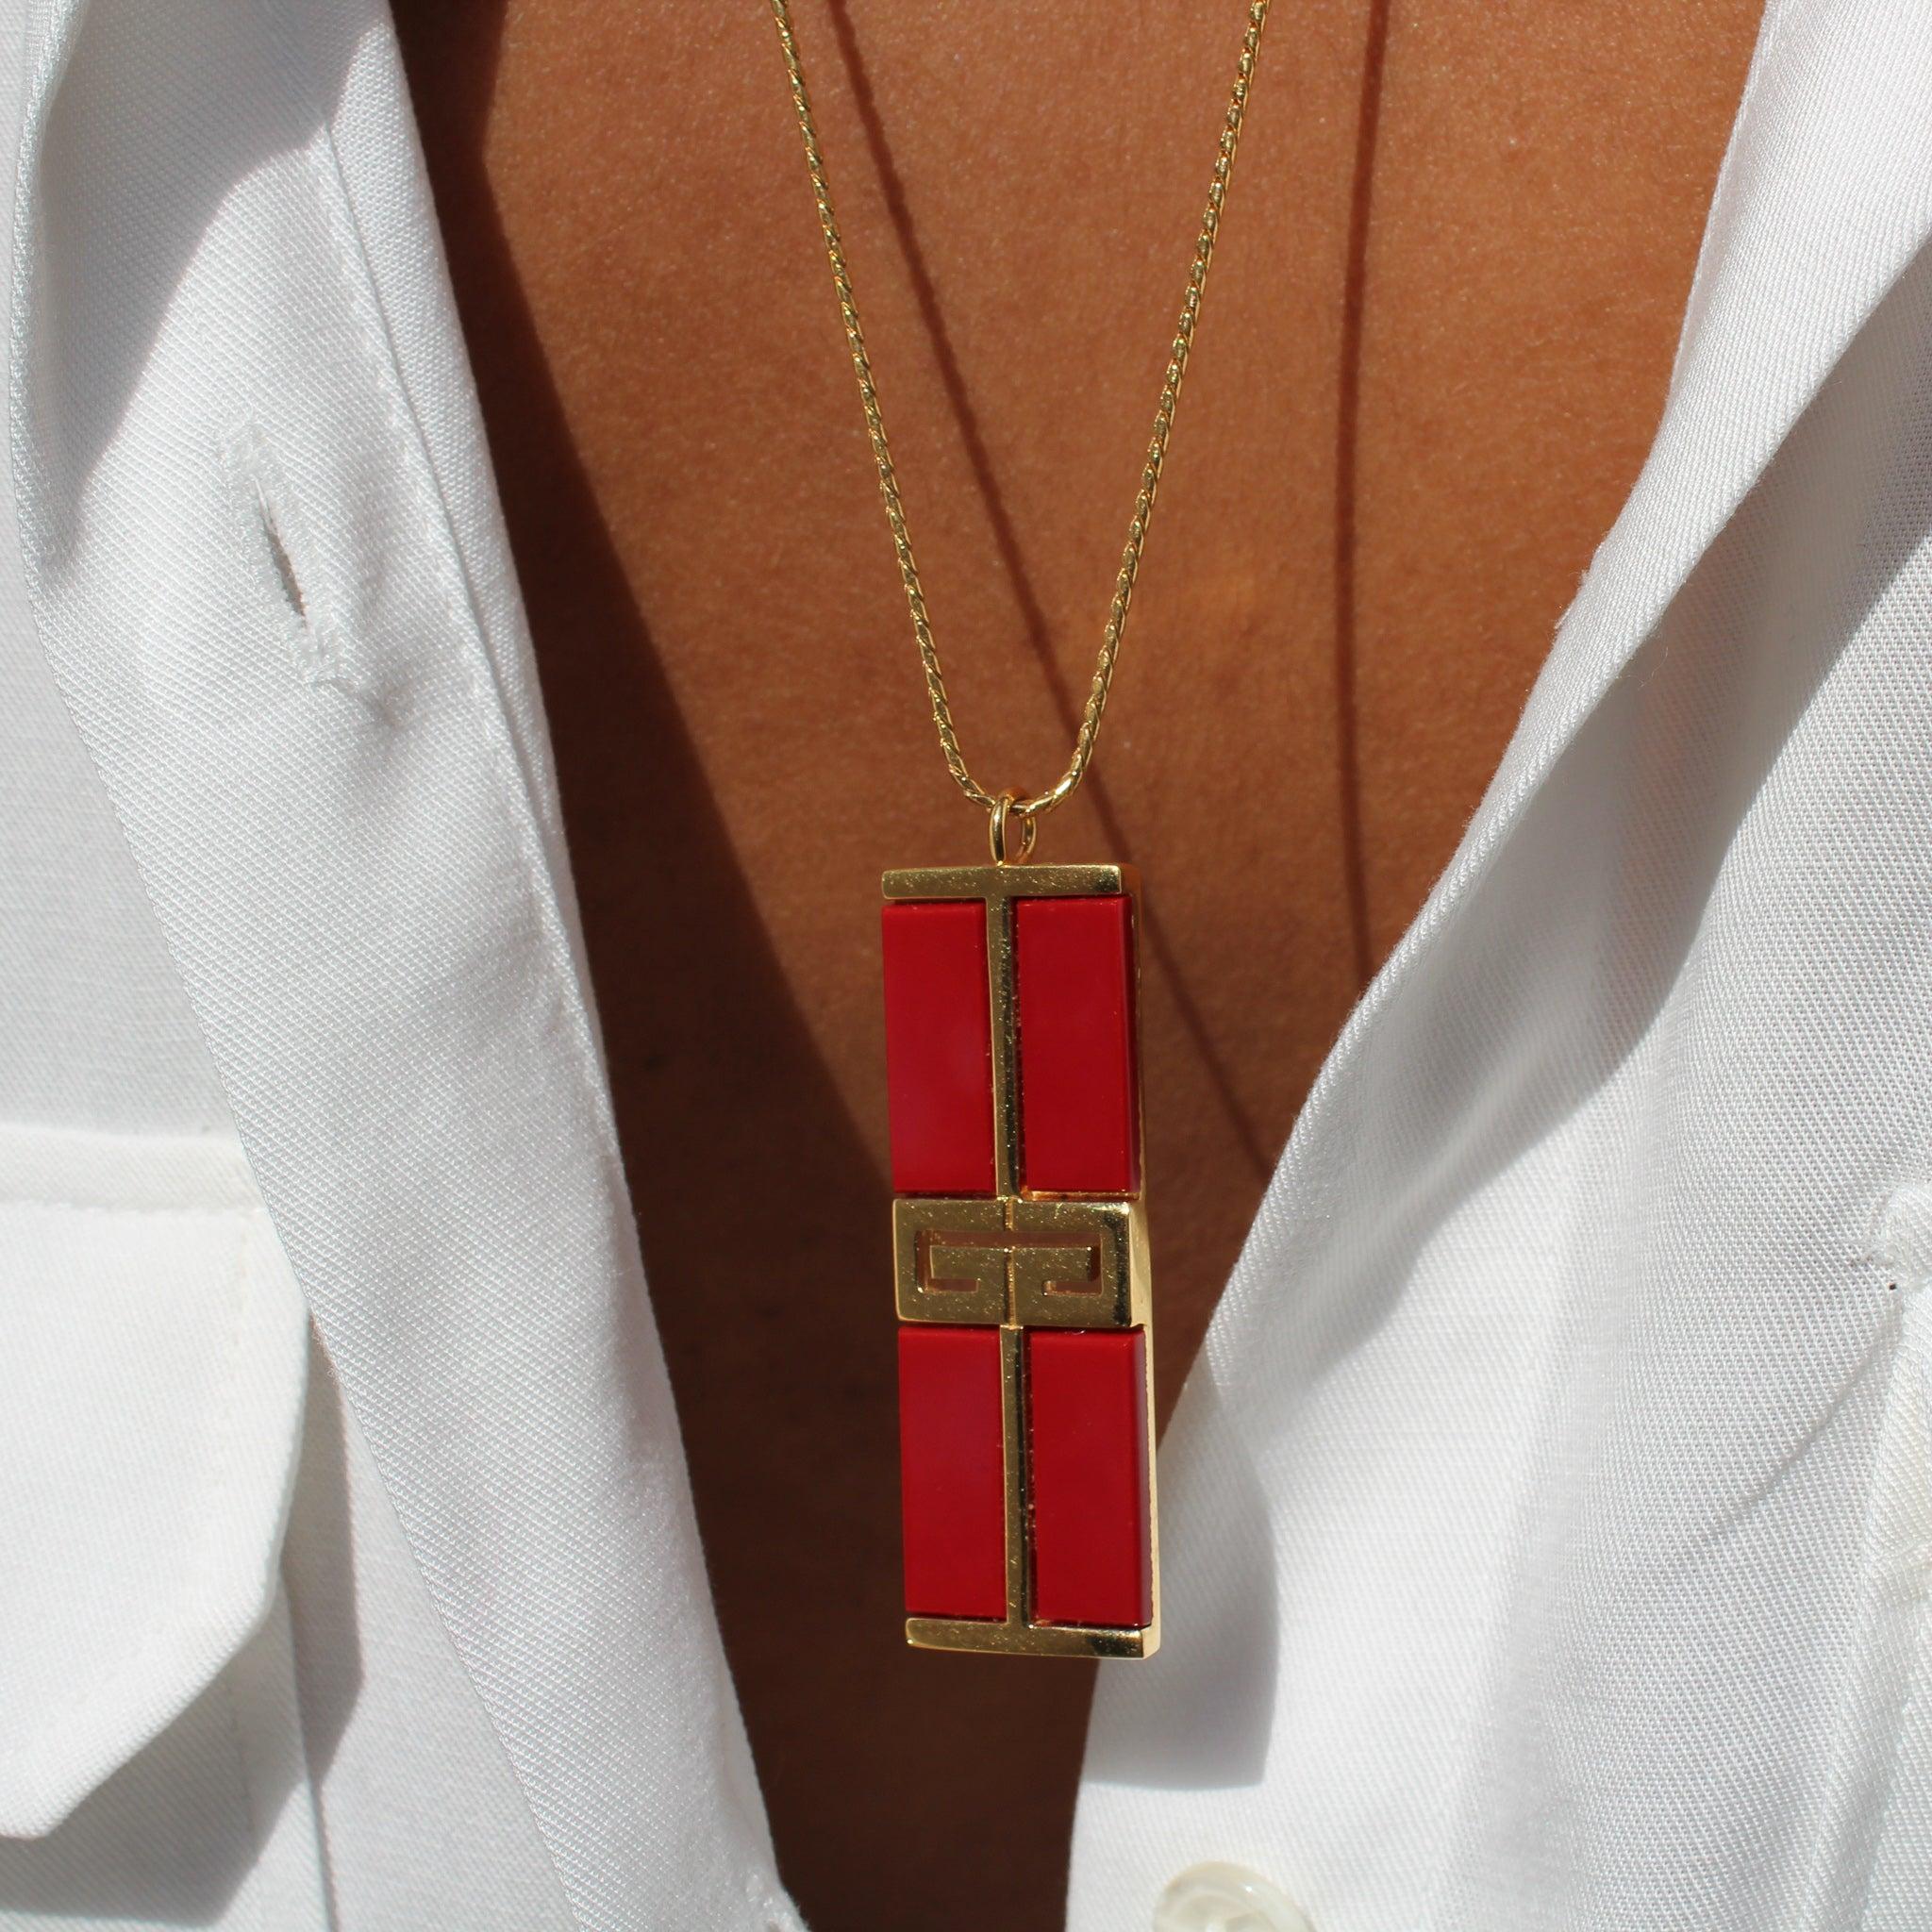 Givenchy Vintage Necklace 1979 

Super cool pendant necklace from the iconic Hubert de Givenchy. Made in France in 1979, this incredible necklace has a gold plated fine chain with a rectangular red enamel pendant featuring the iconic double G